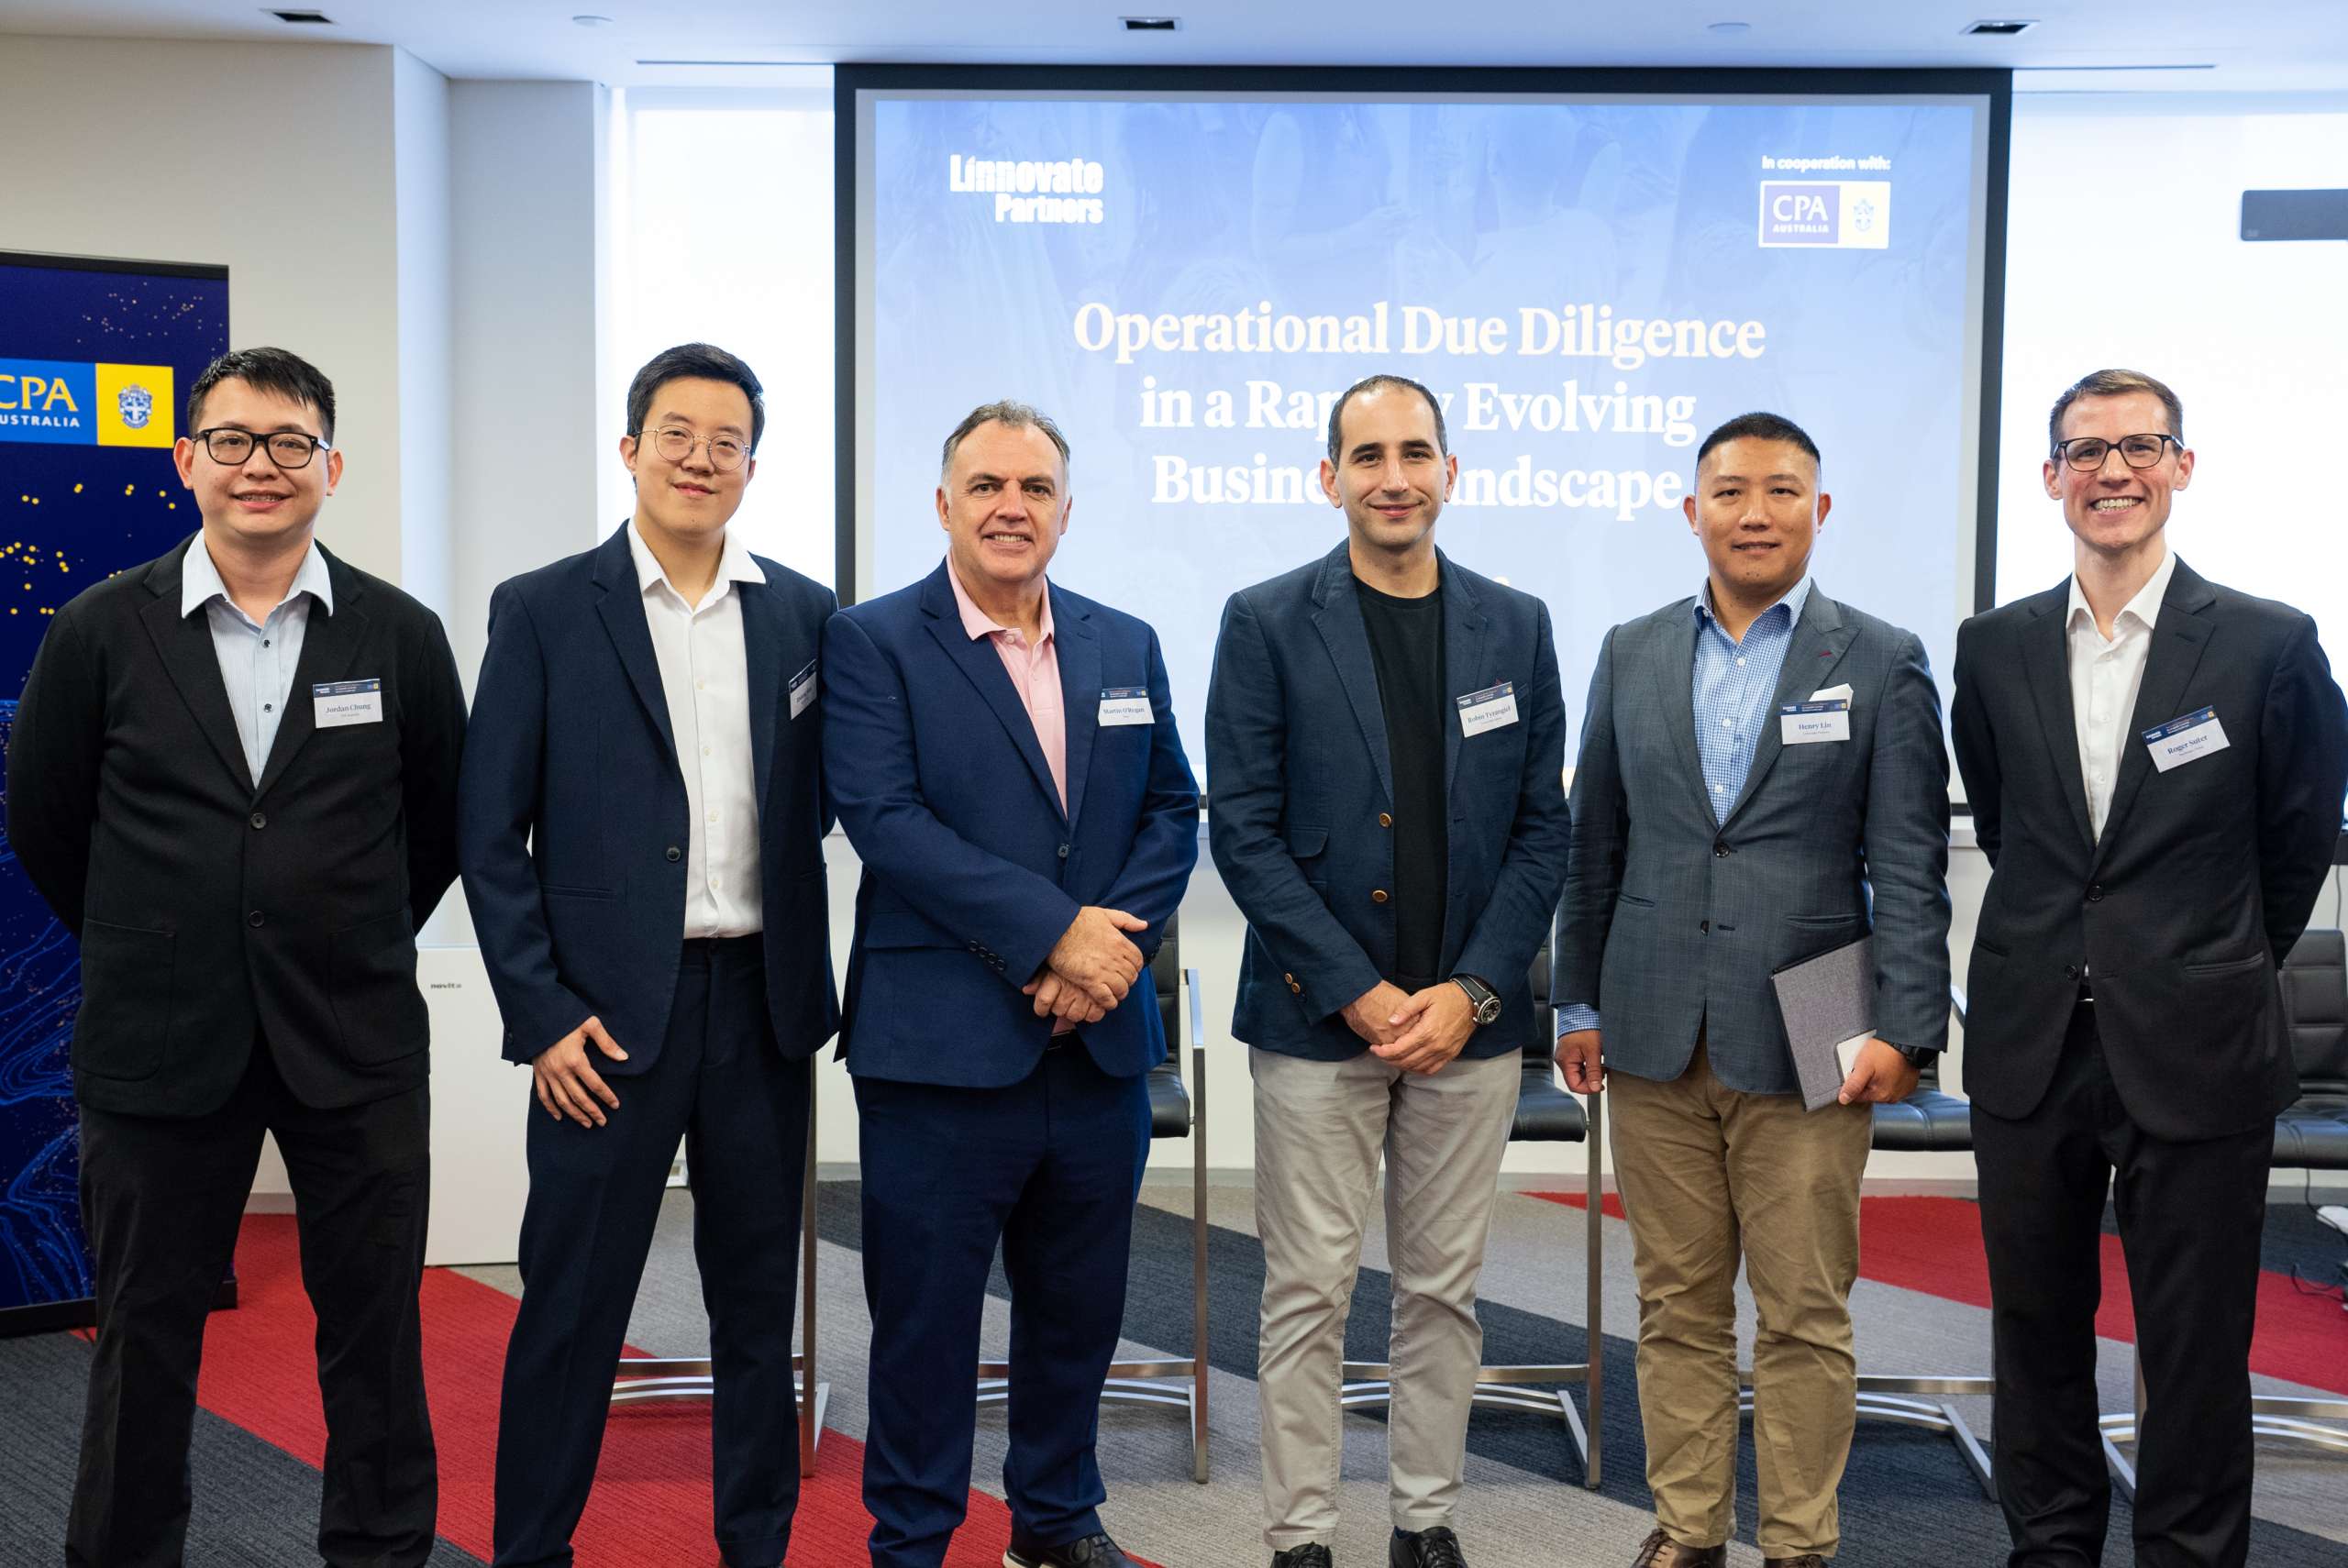 Linnovate Partners and CPA Australia Host Operational Due Diligence Seminar in Singapore